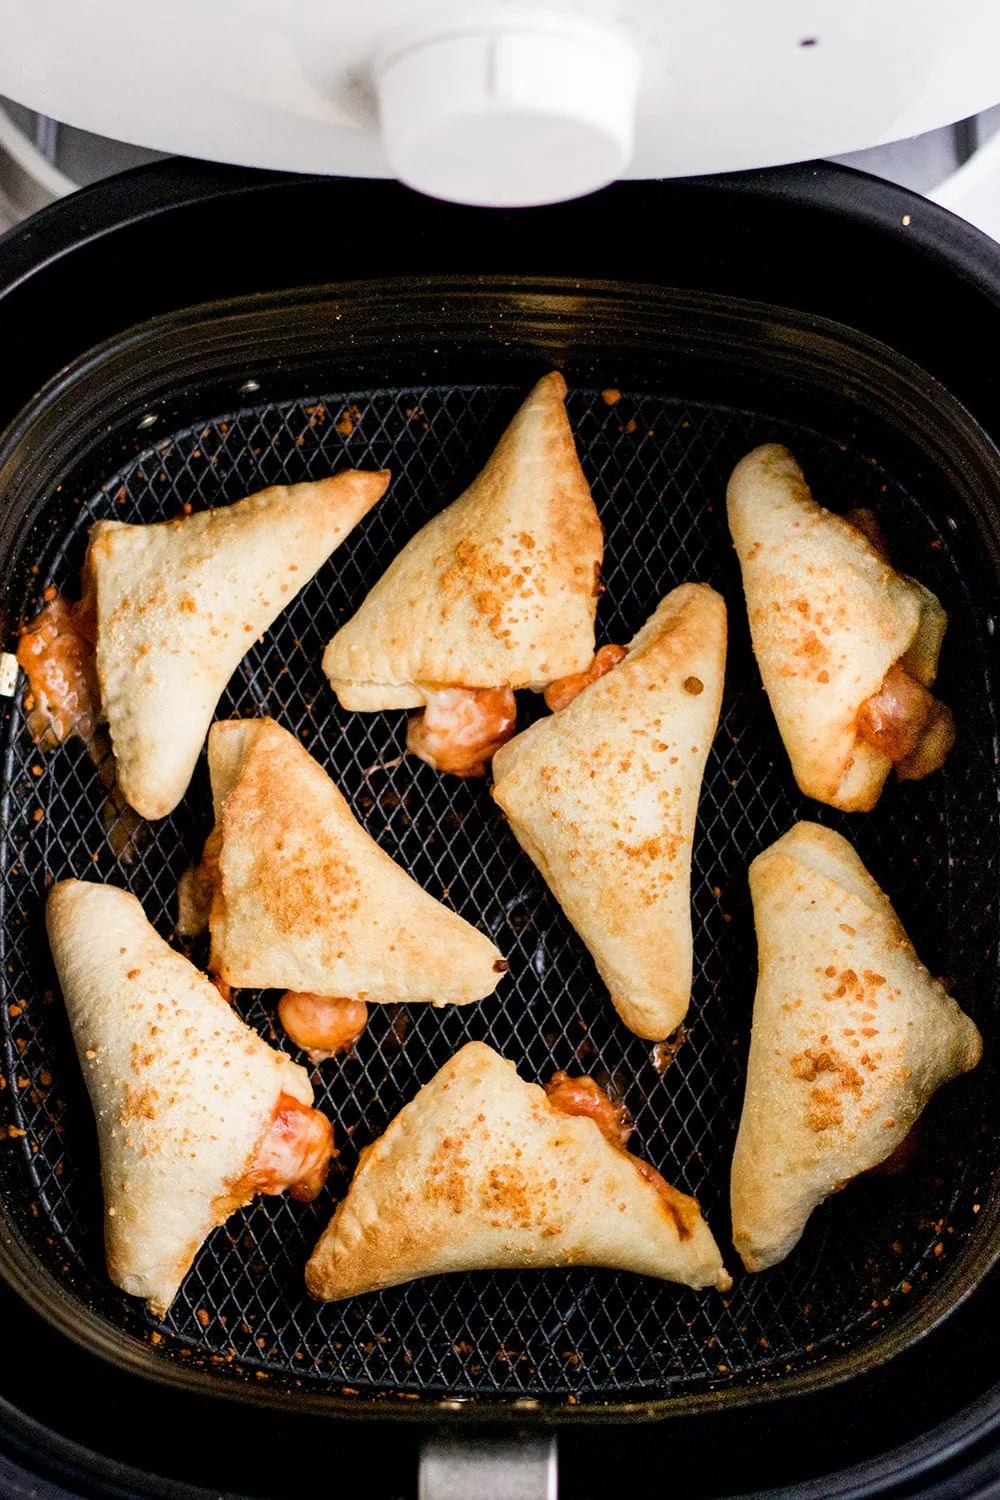 Cooked pizza rolls in an air fryer.